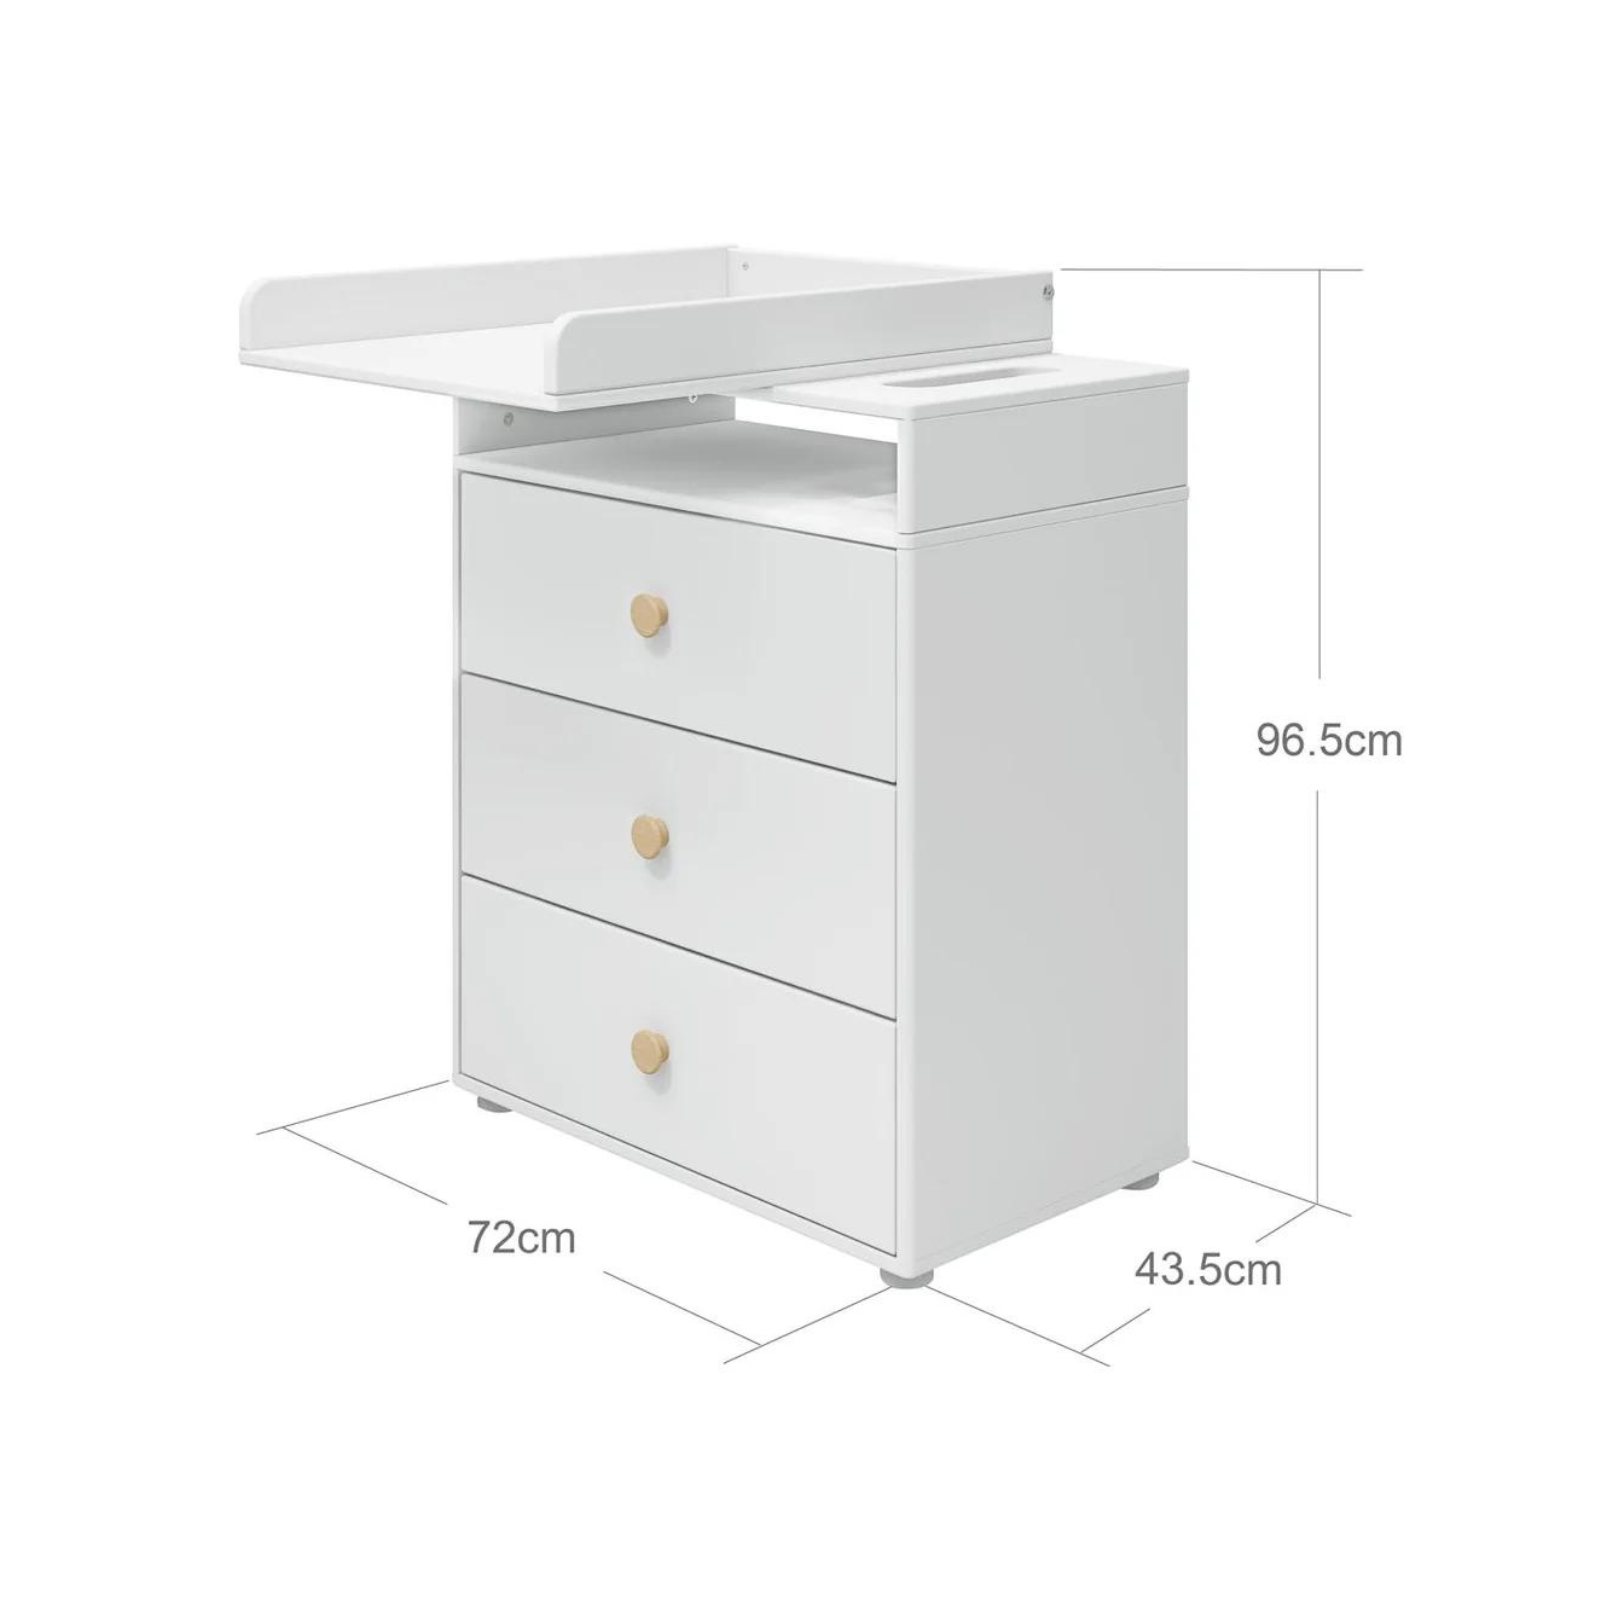 FLEXA Changing Table with Three Drawers dimensions